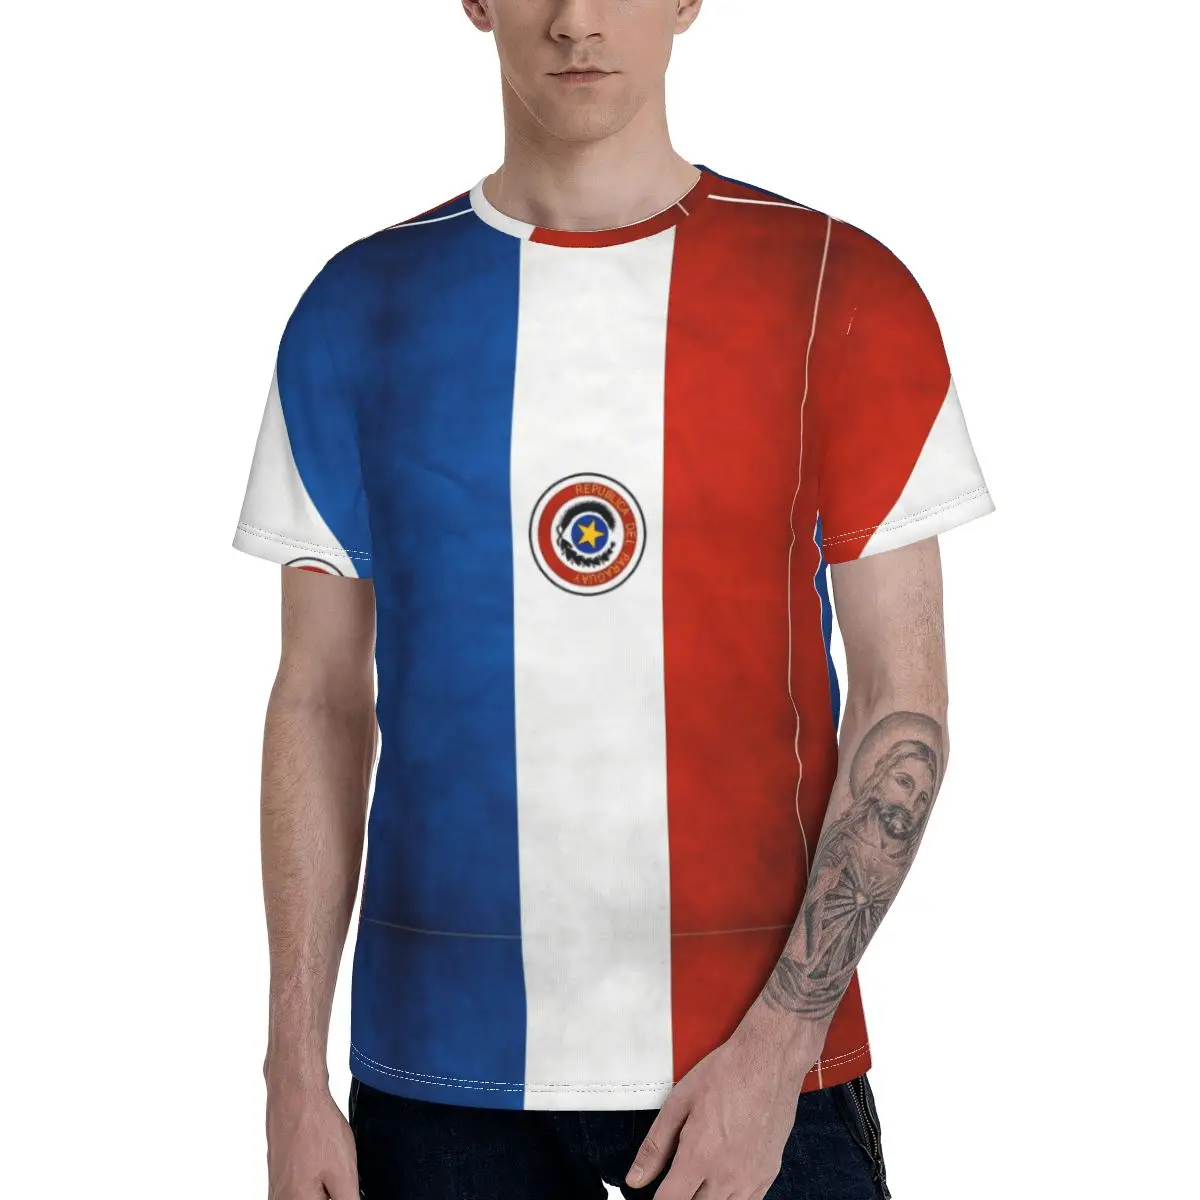 

Paraguay Paraguayan Flag National Flag Of Paraguay T-shirt Promo Novelty Funny Novelty Tops Tees European Size